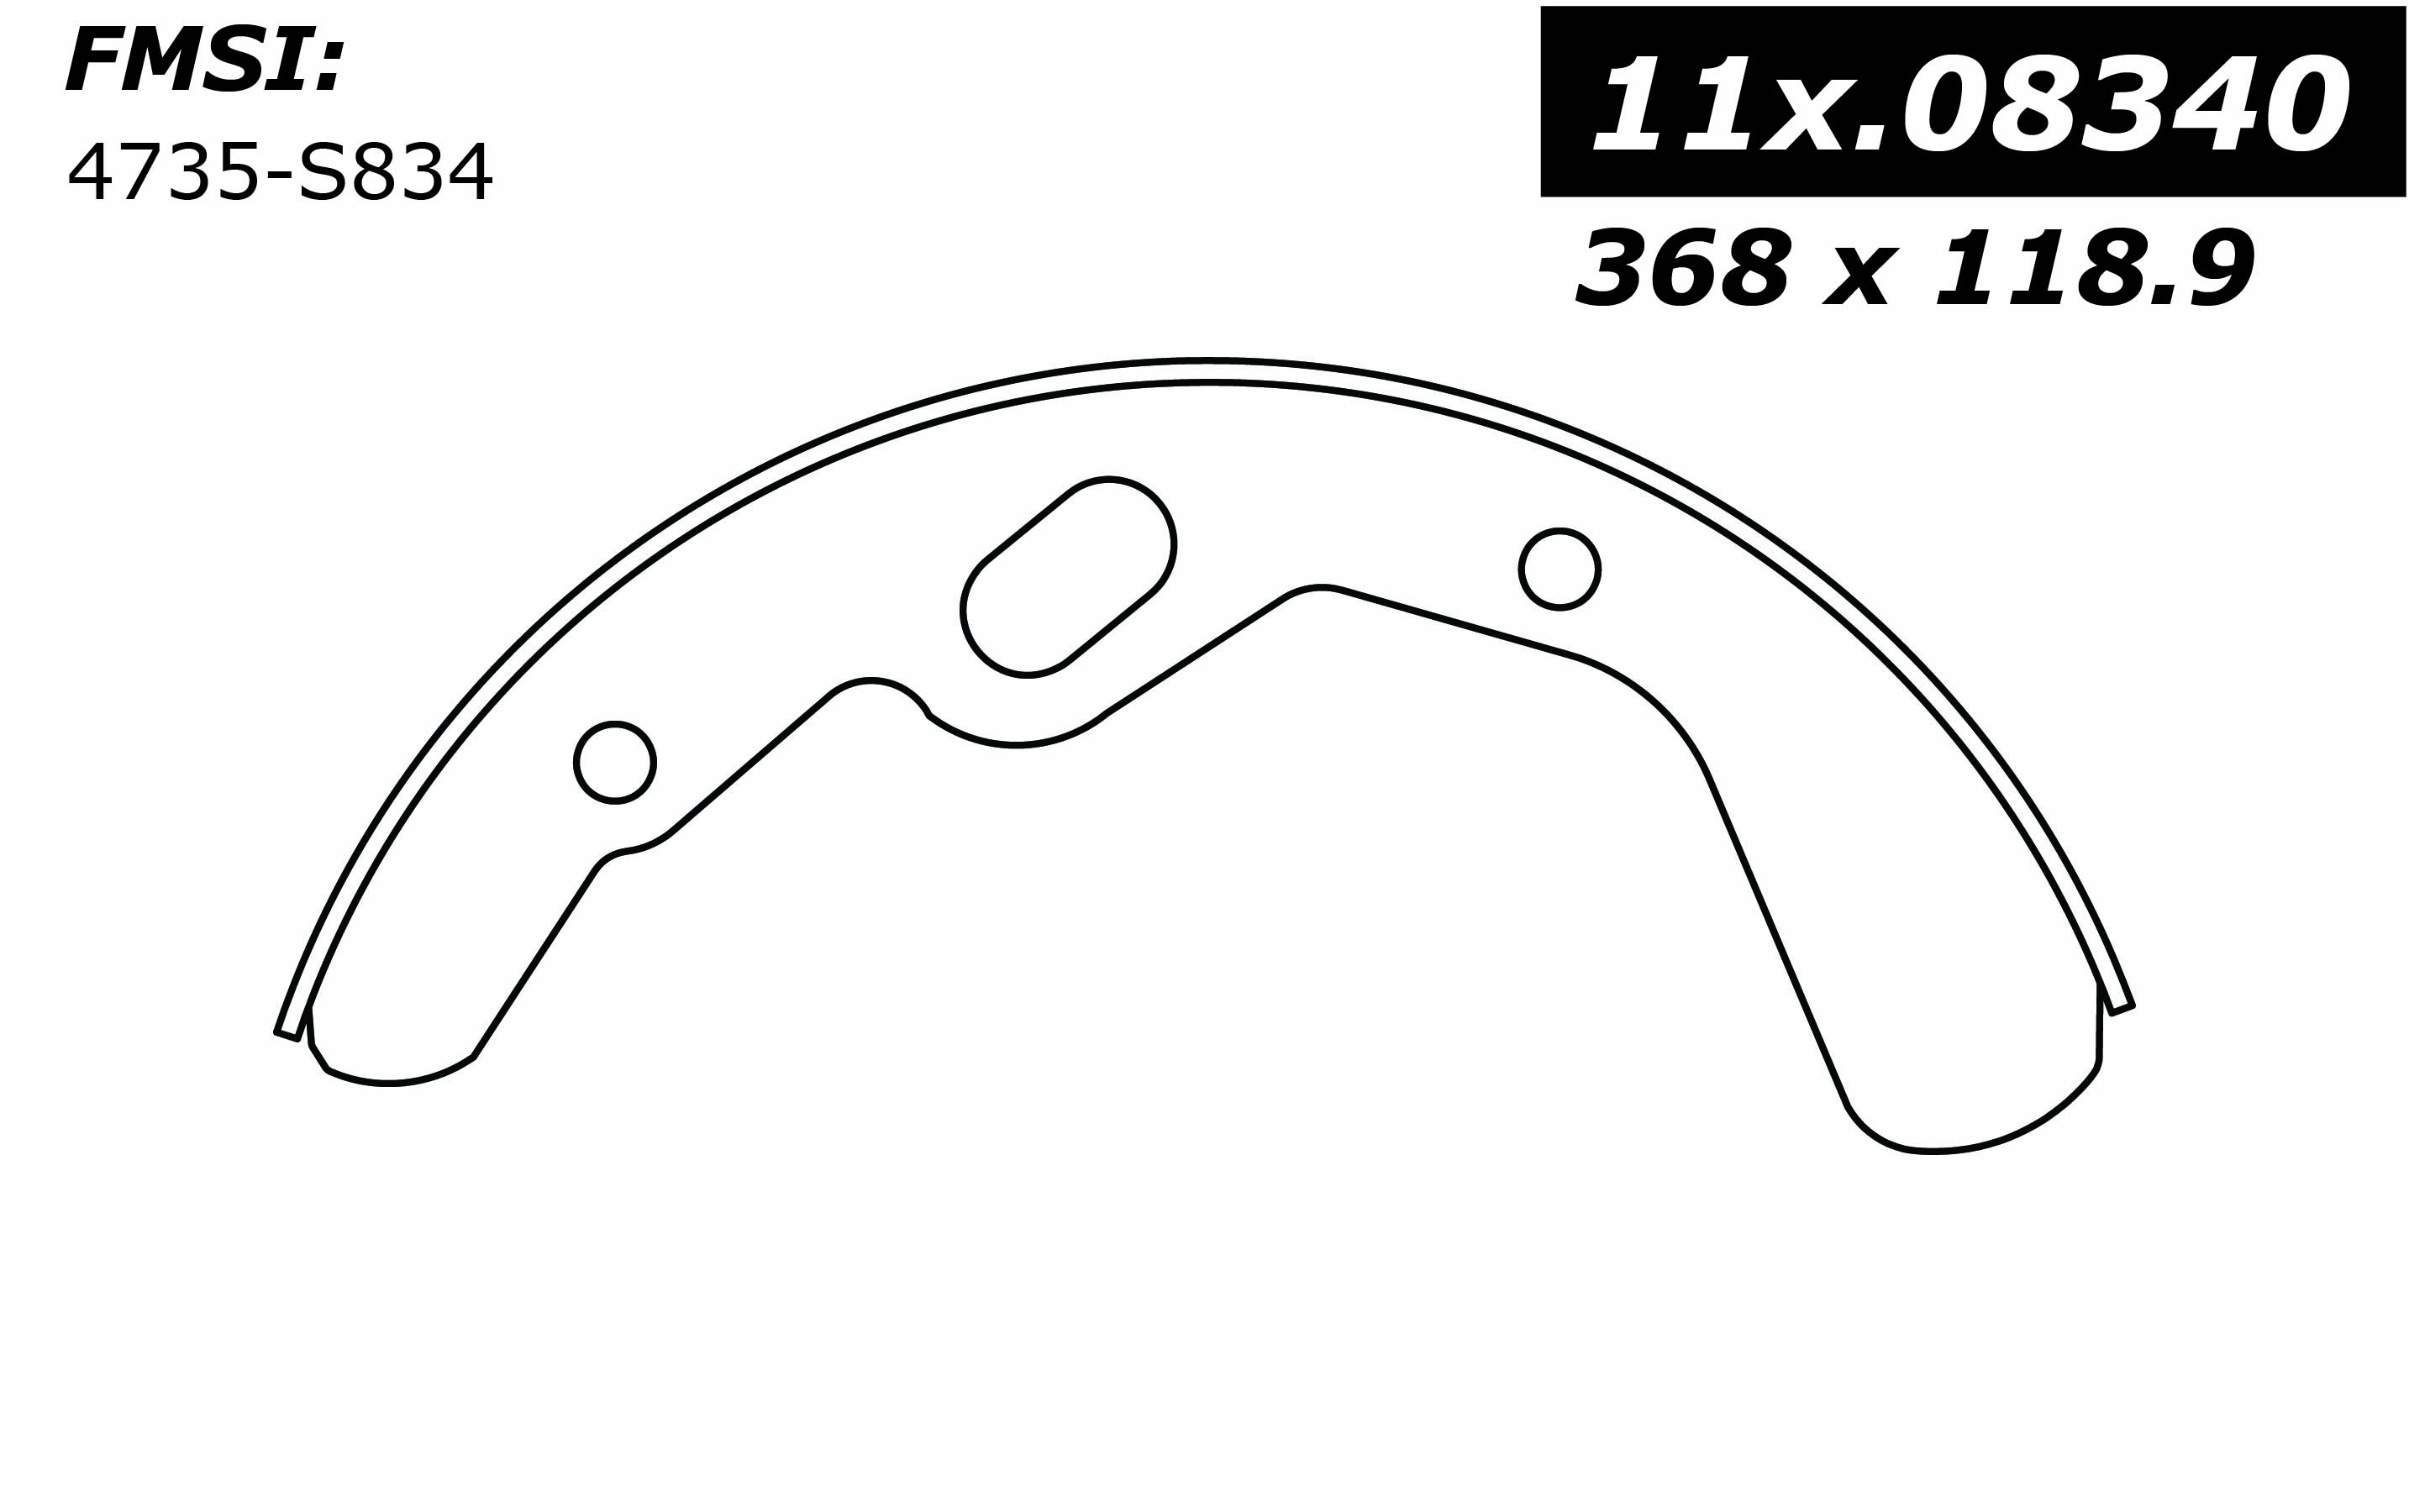 112.08340 Riveted Brake Shoes 805890634591